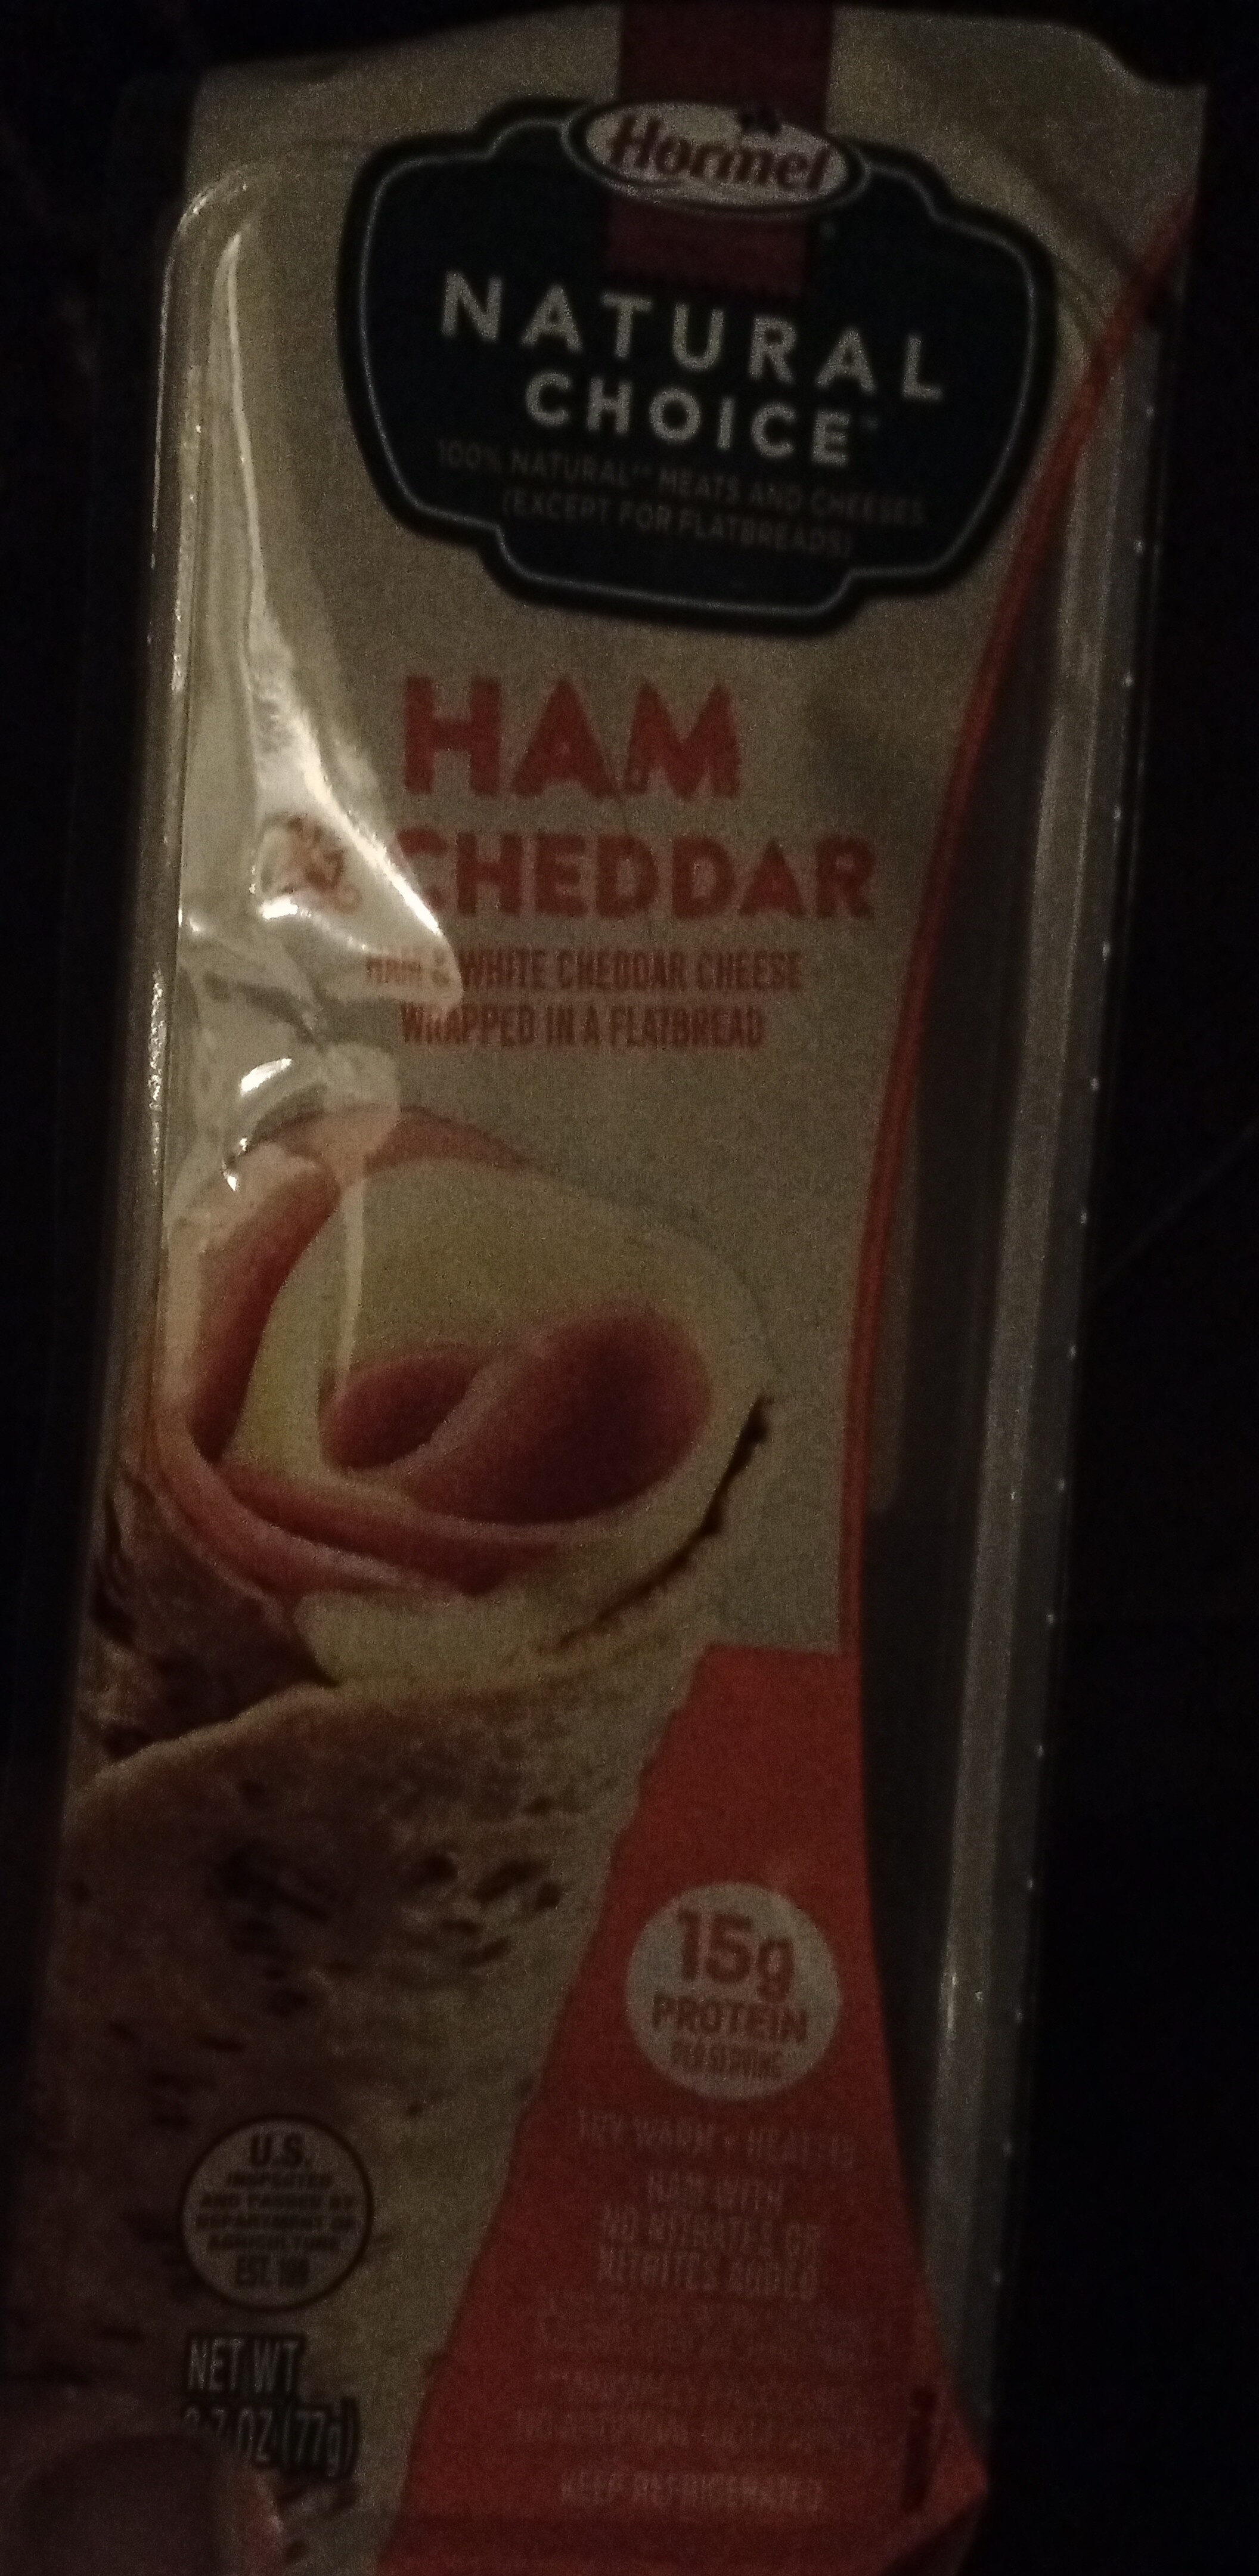 Ham & white cheddar cheese wrapped in a flatbread - Product